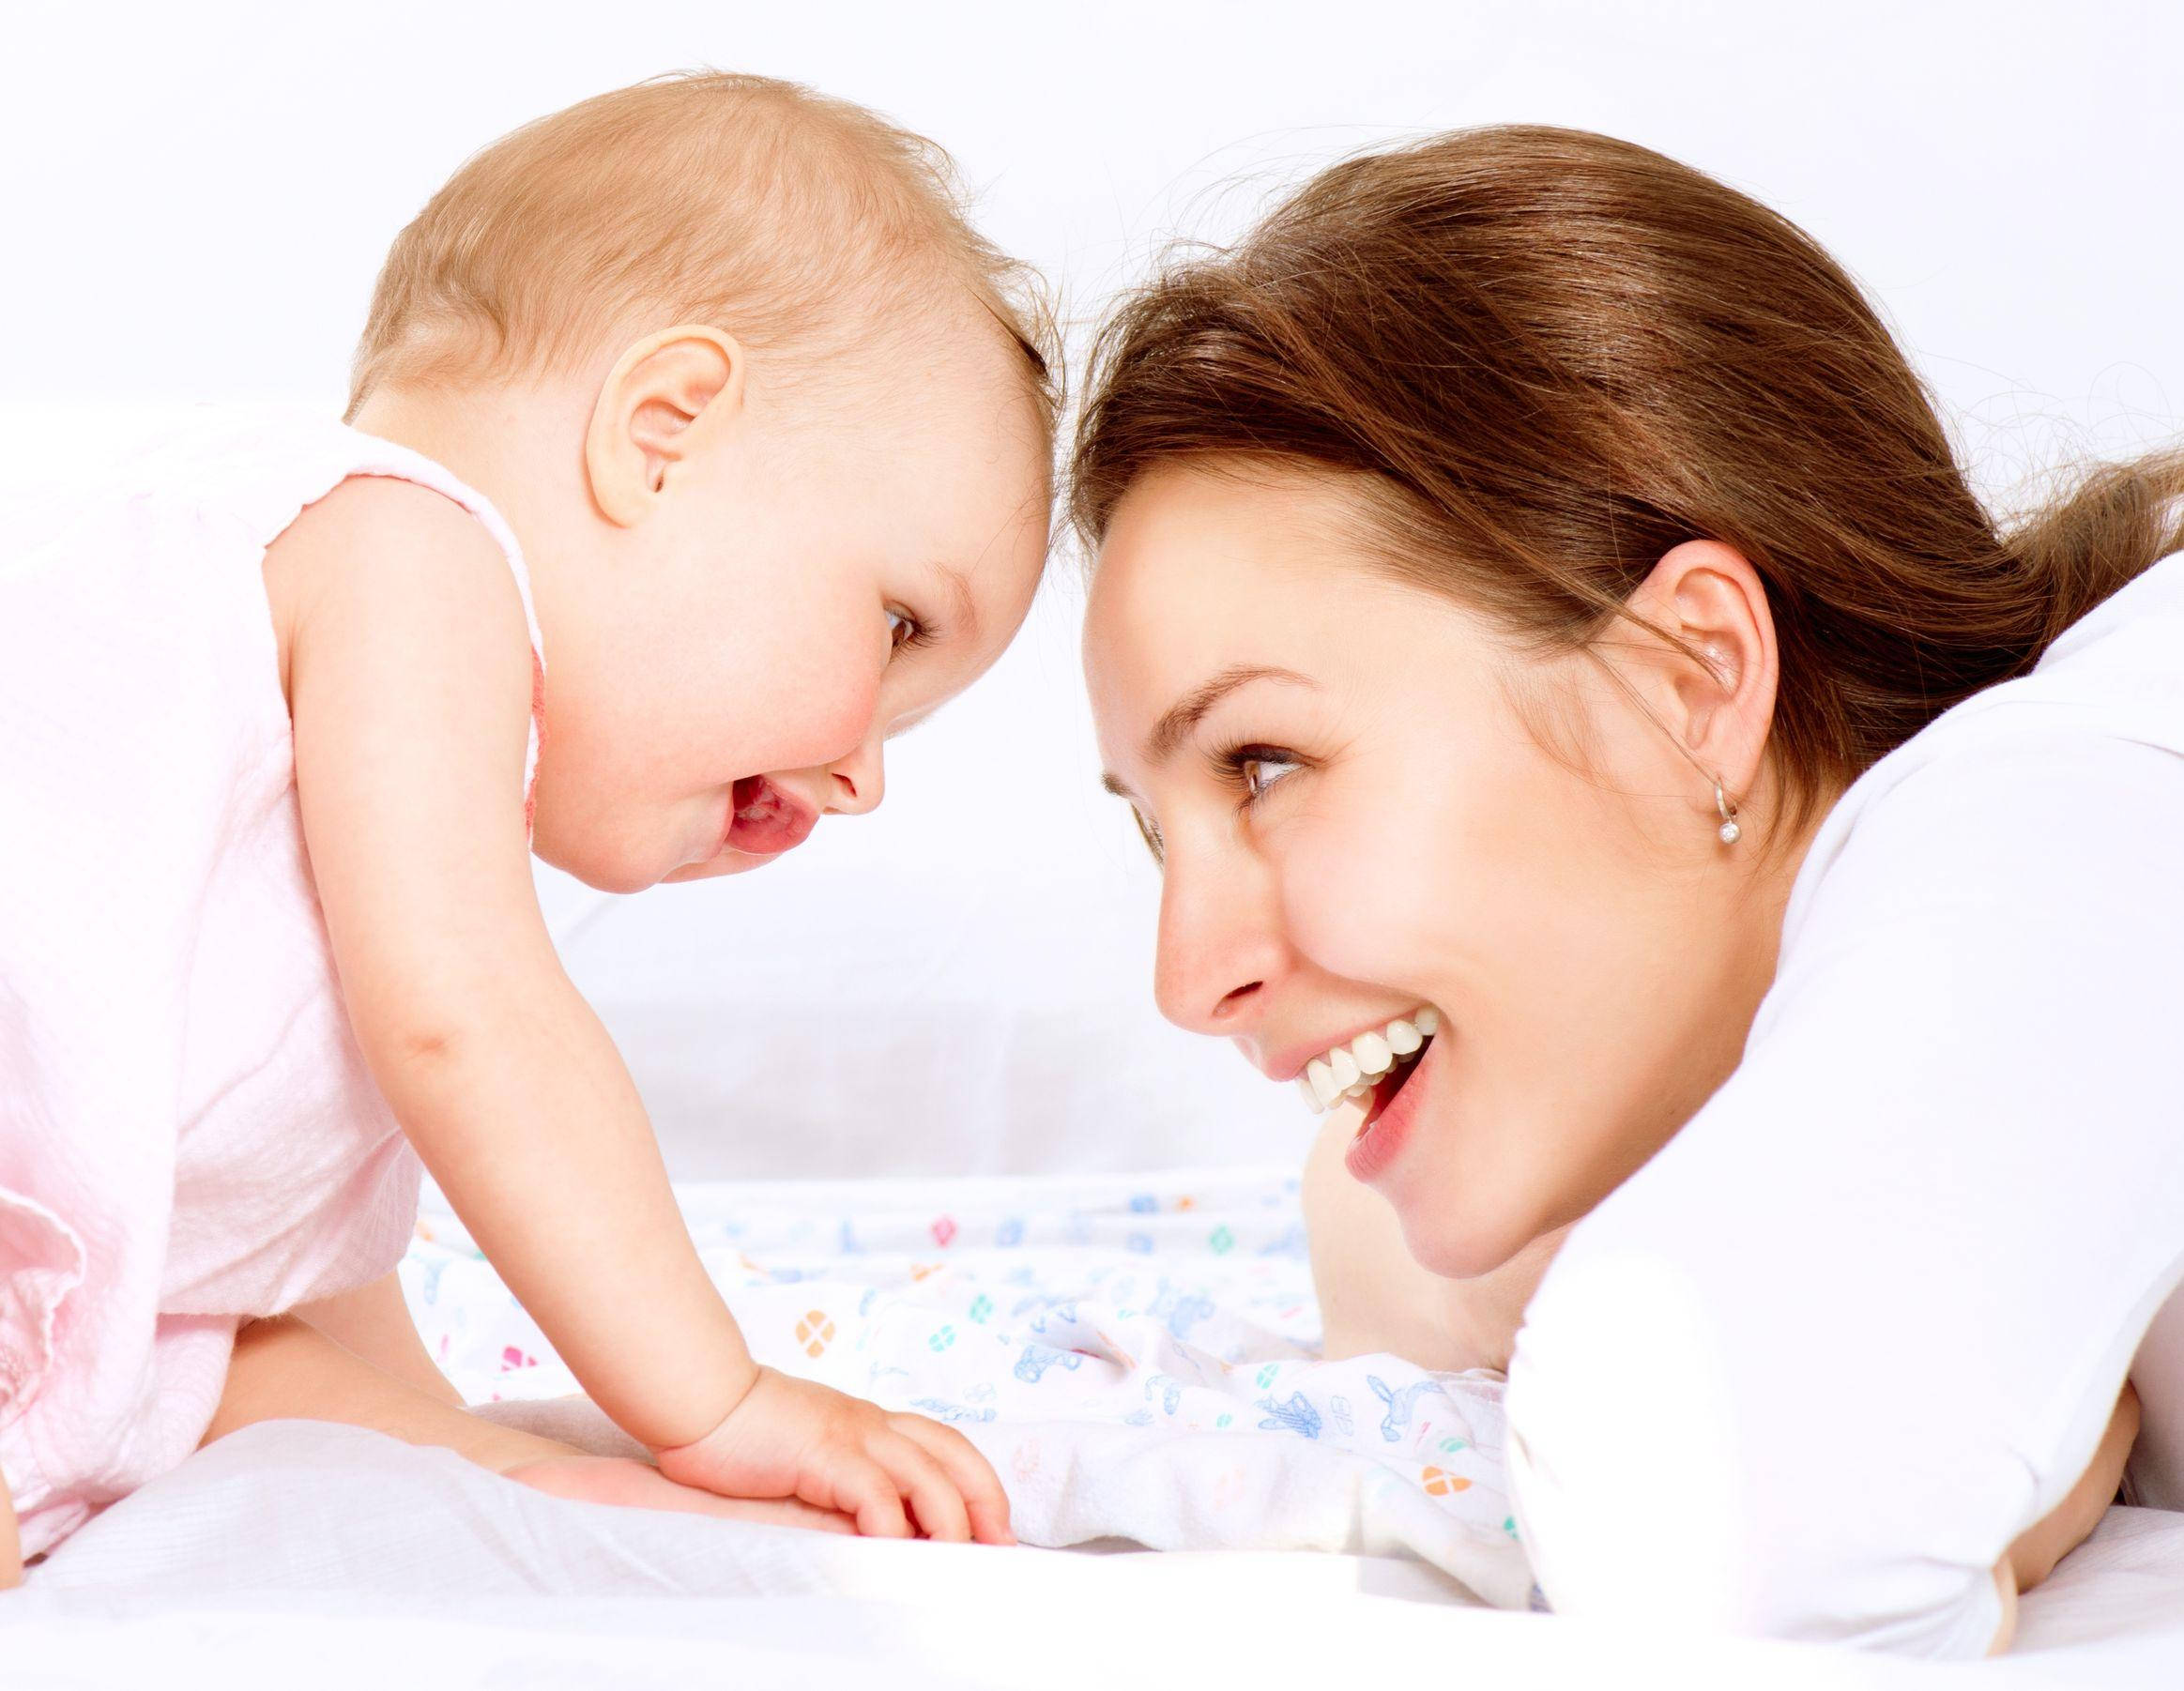 Face-To-Face With Baby Love Wallpaper